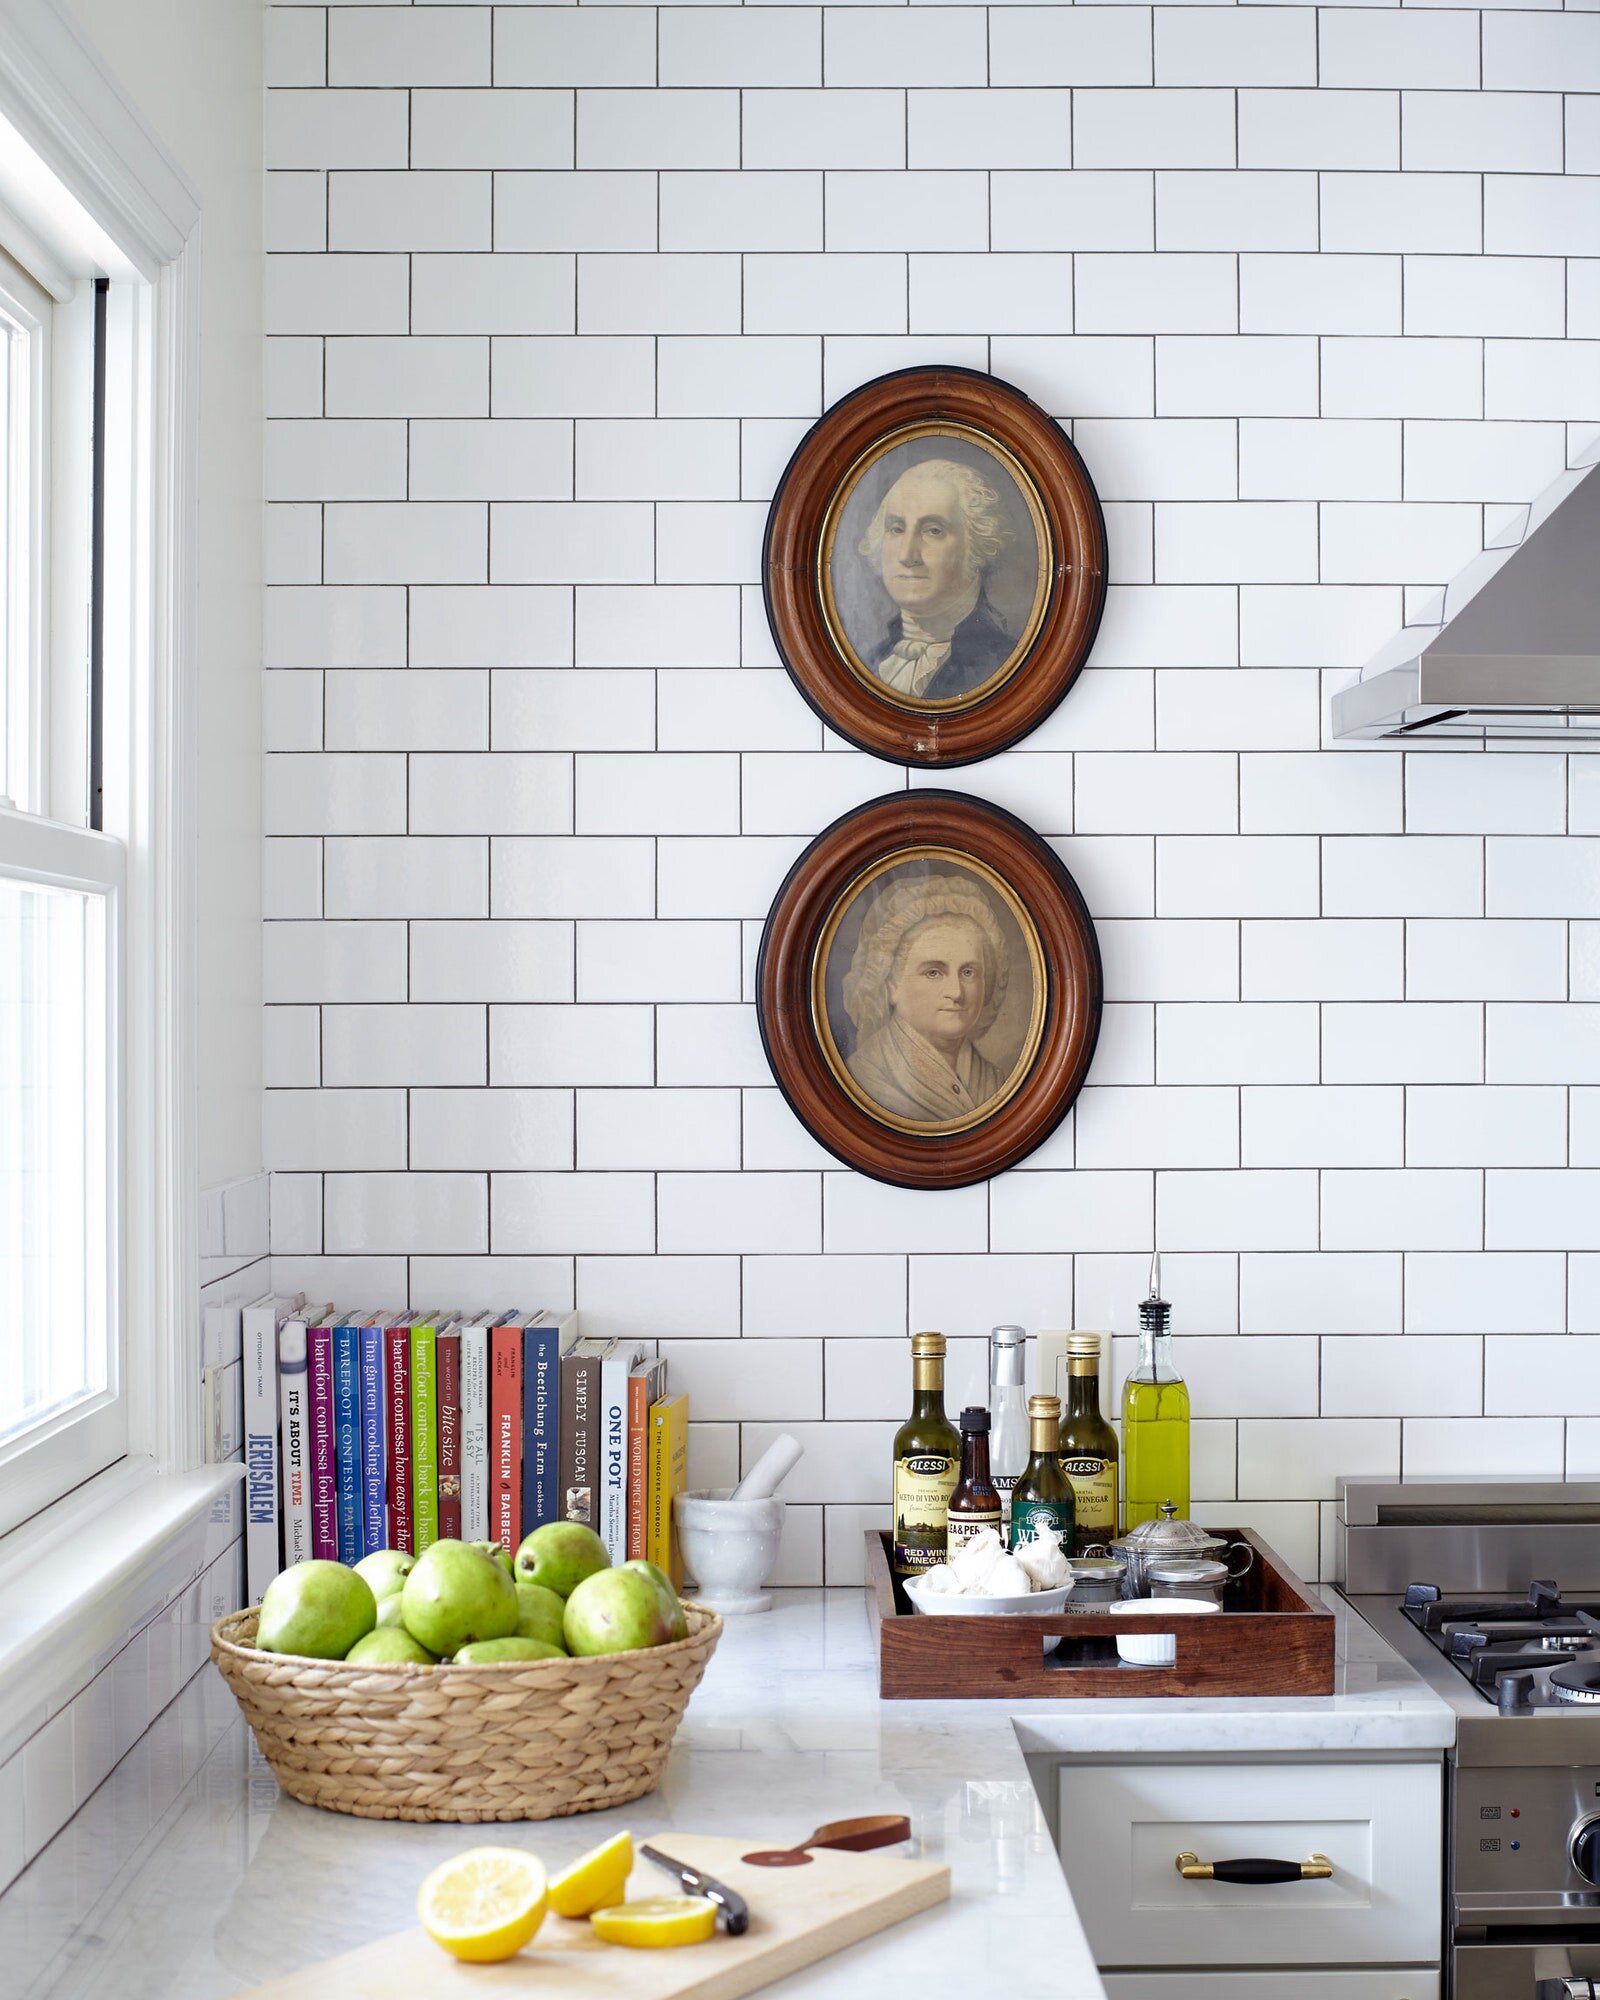 vintage artwork is so trendy right now to have on the walls of your kitchen - see if you can dig anything up from your basement even